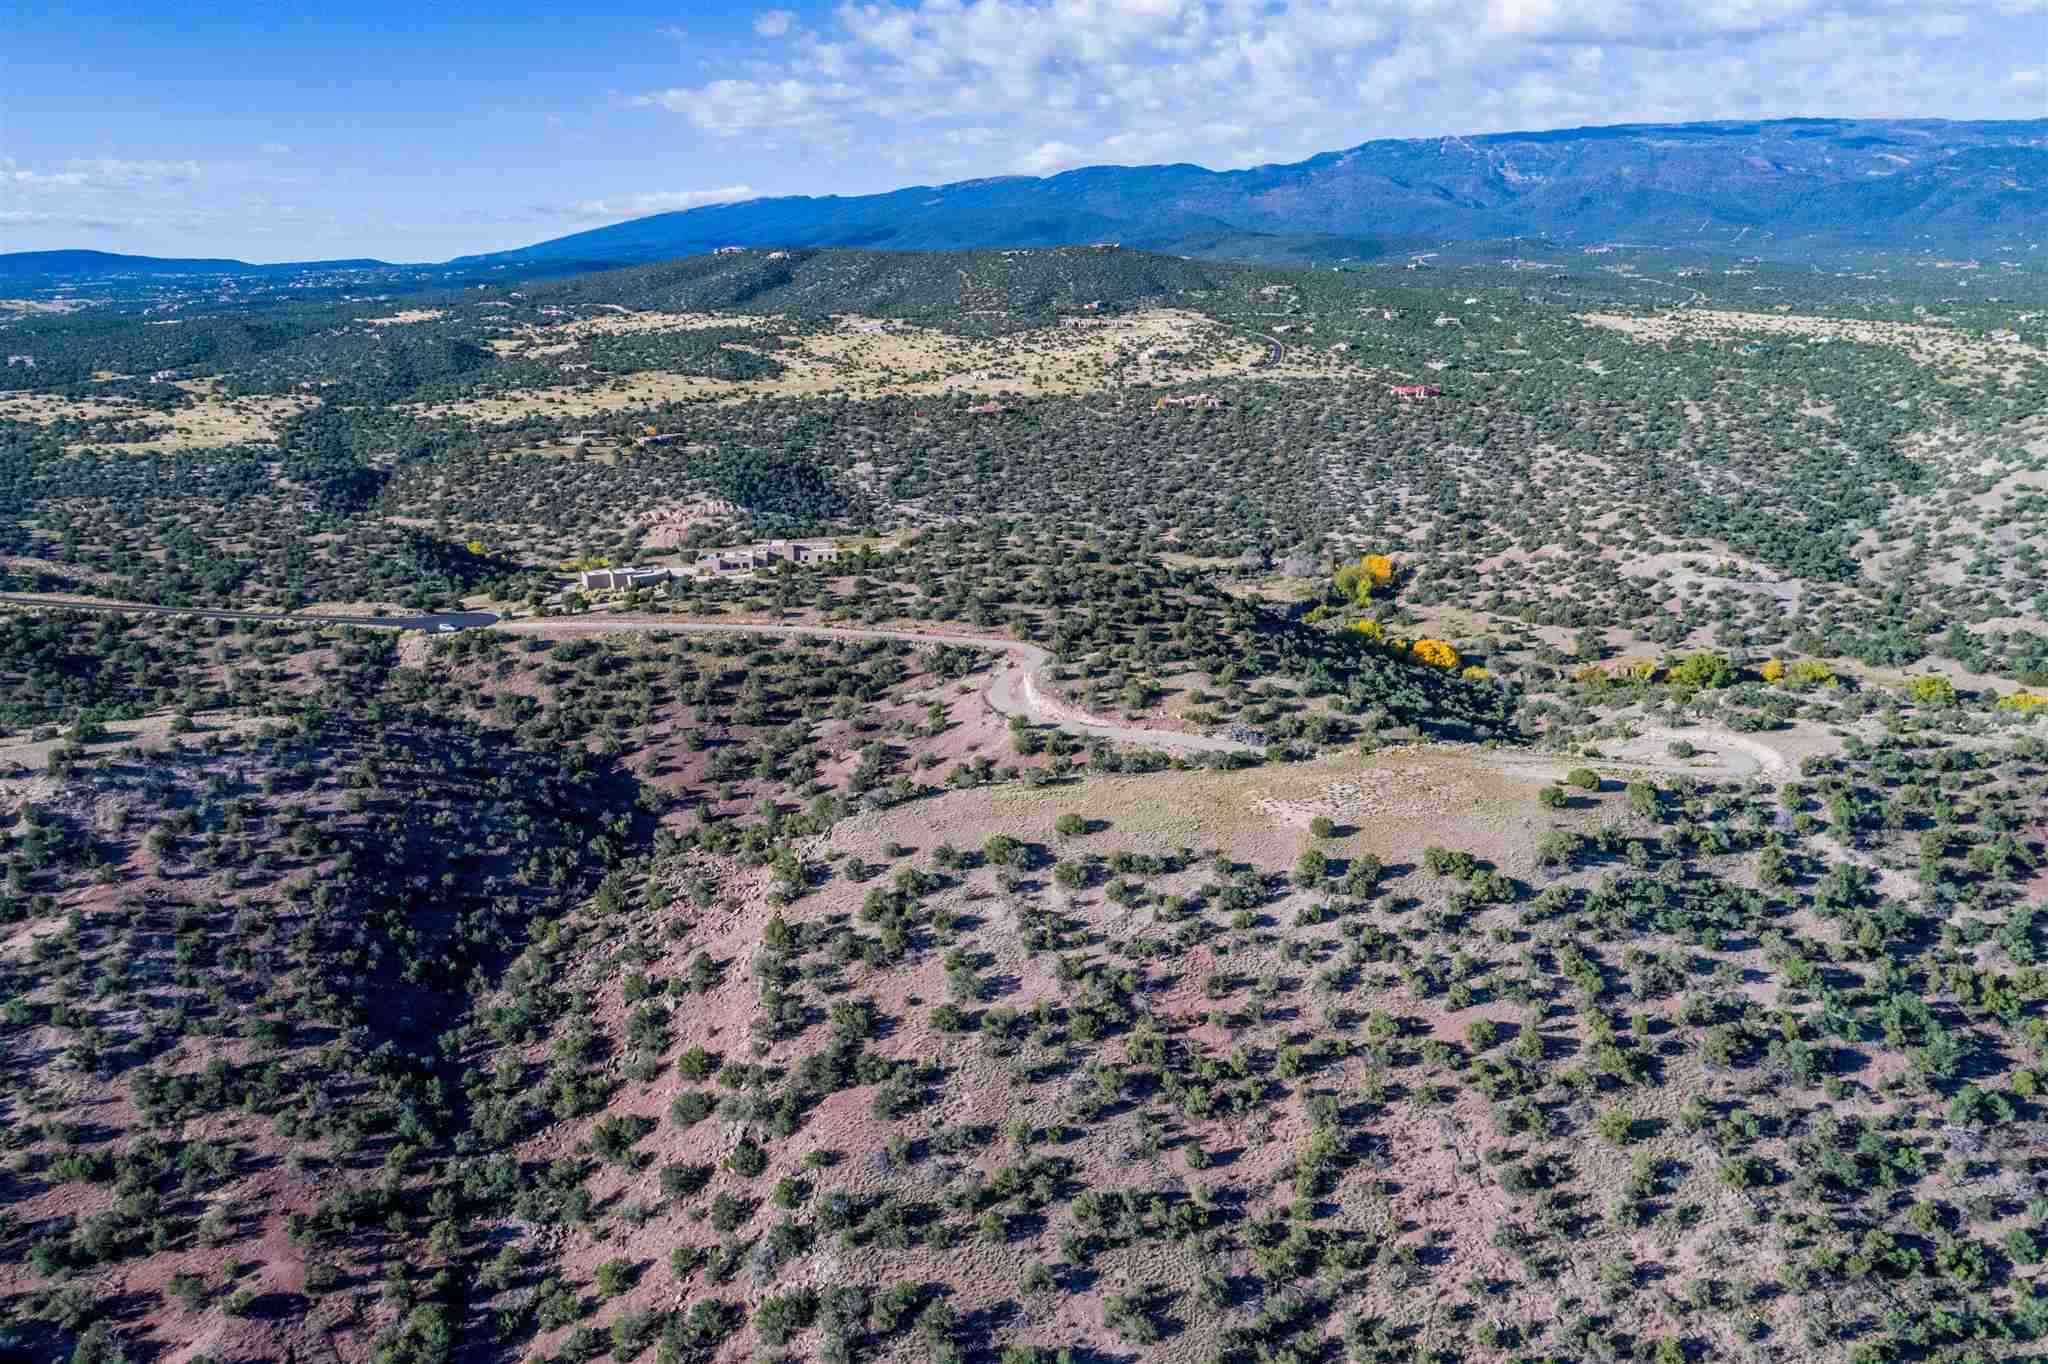 71 Creekside Trail, Sandia Park, New Mexico 87047, ,Land,For Sale,71 Creekside Trail,202233359